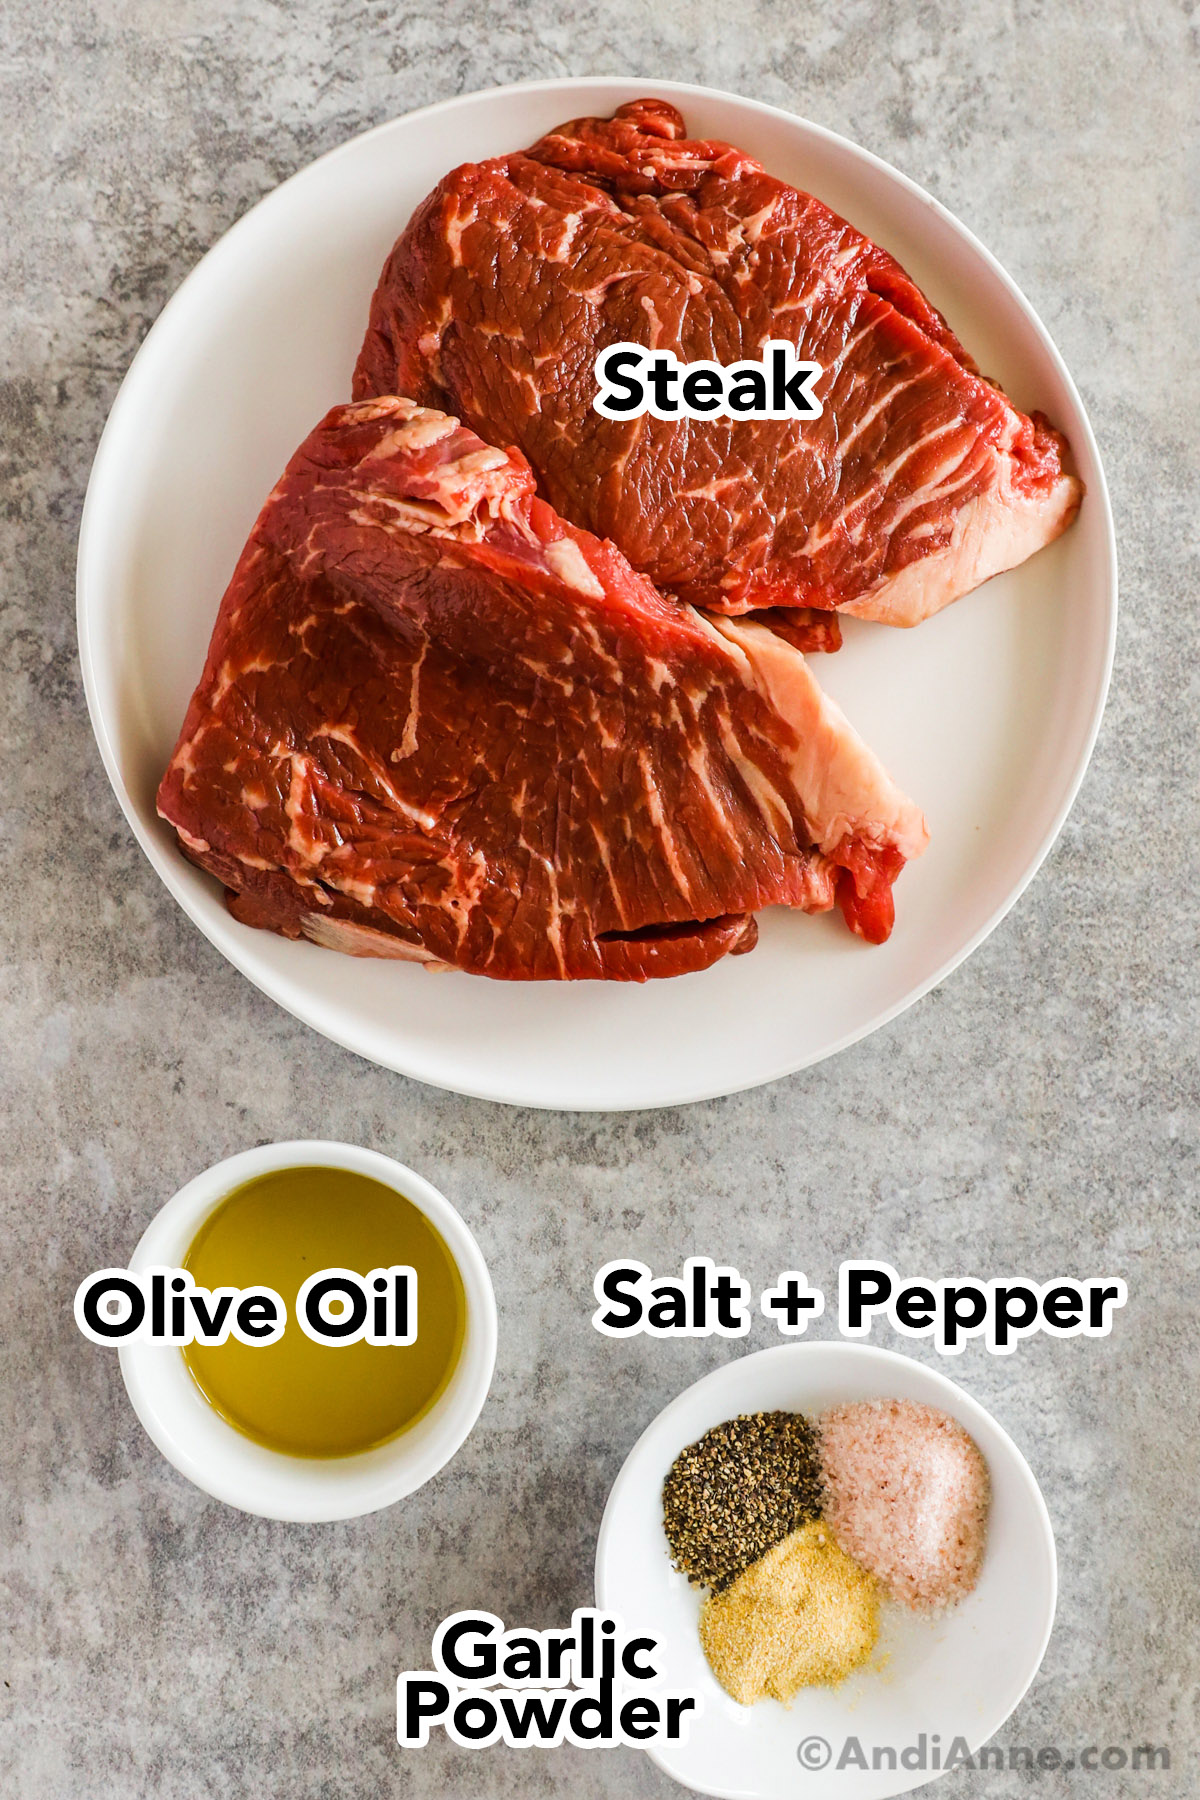 Raw steaks on a plate, bowl of olive oil, salt and pepper, and garlic pepper.